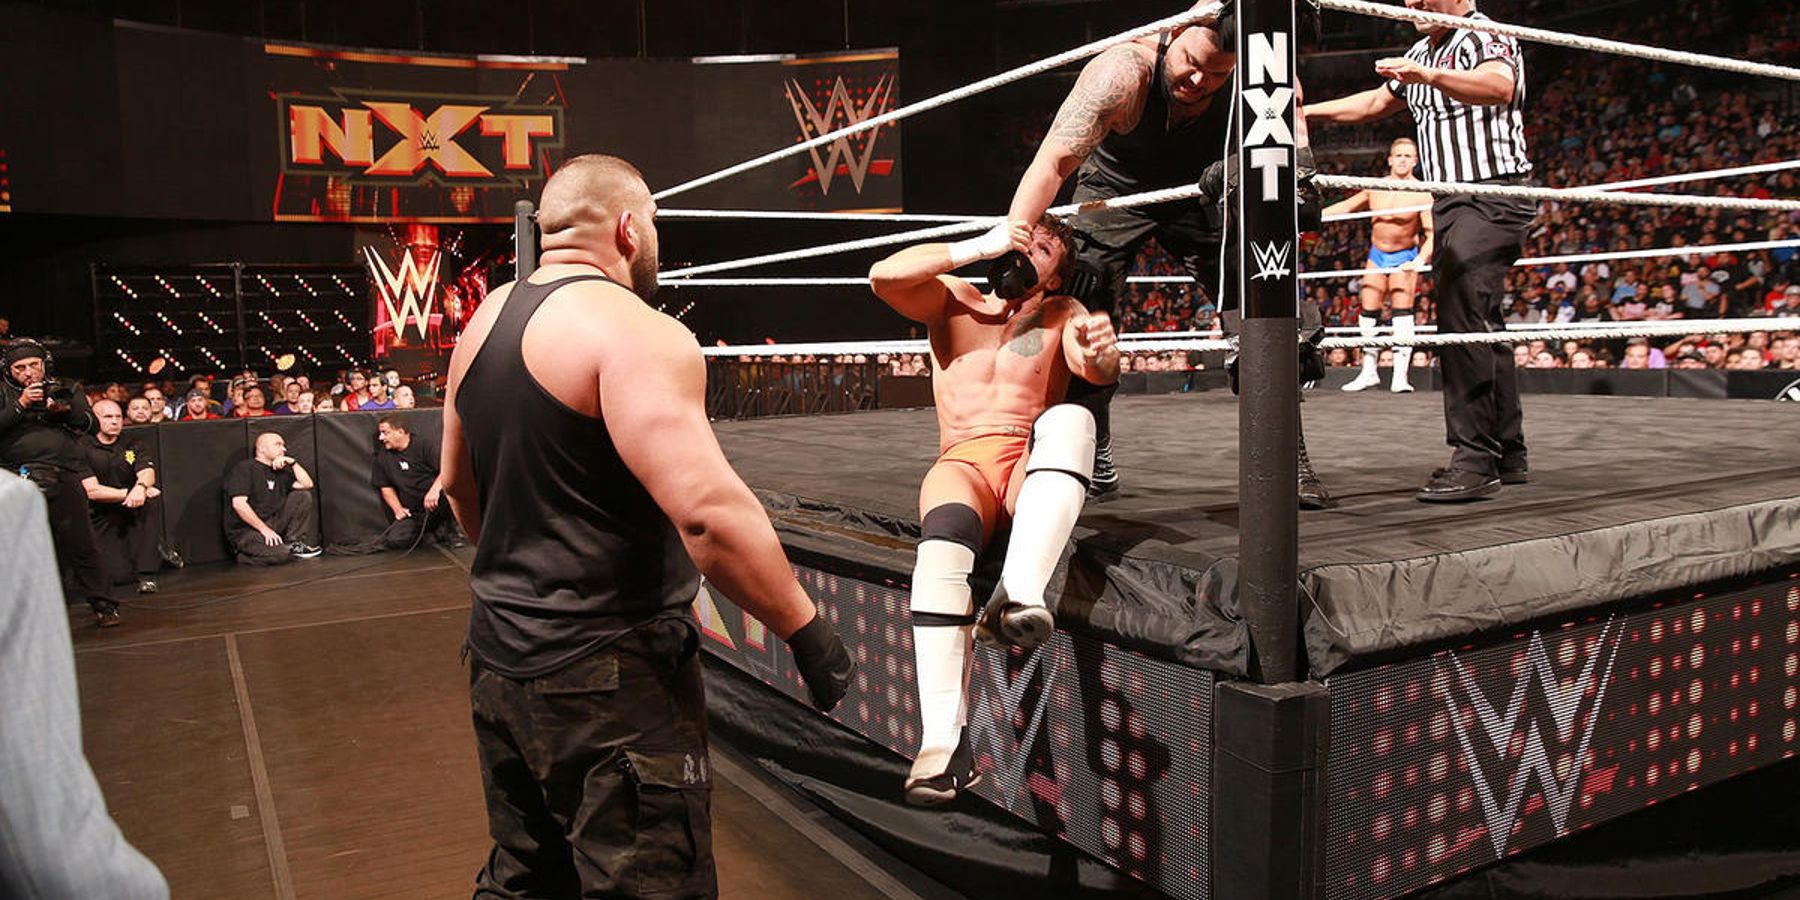 The Authors of Pain wrestle in an NXT match during their time in WWE's developmental brand.